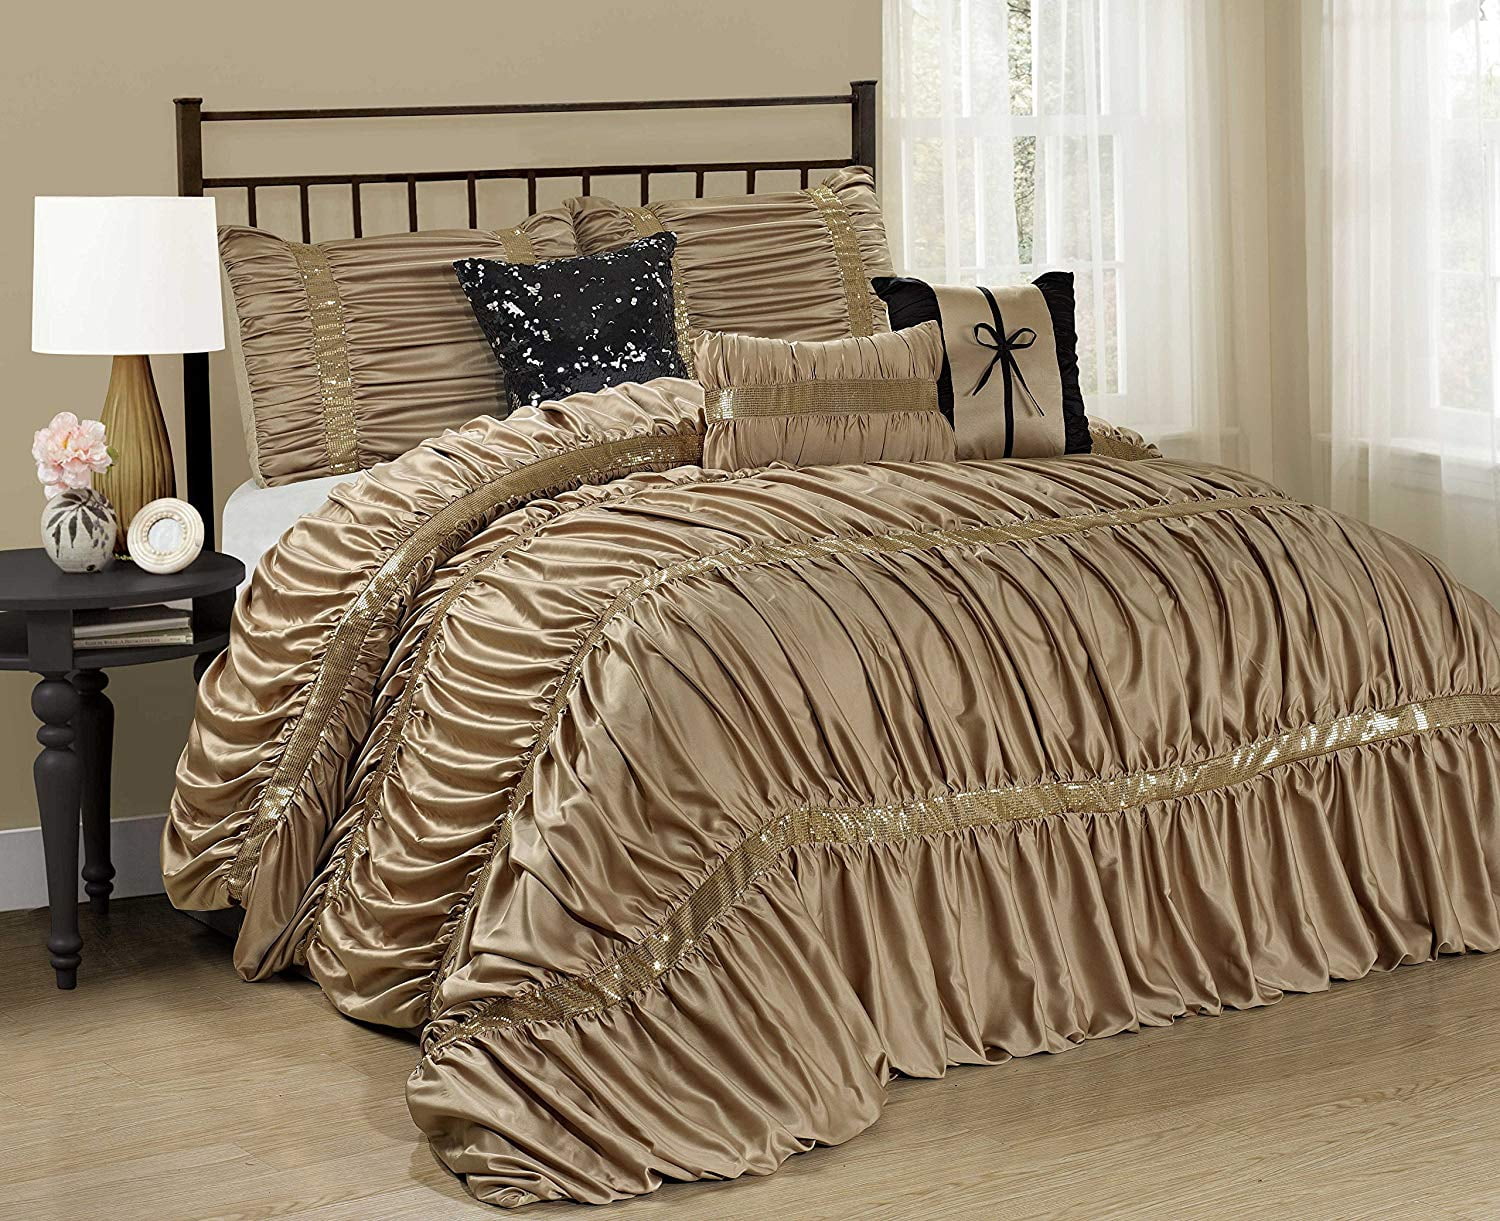 Deluxe Silky Gold Jacquard 7 pcs Comforter Cal King Queen set or Window Curtain 